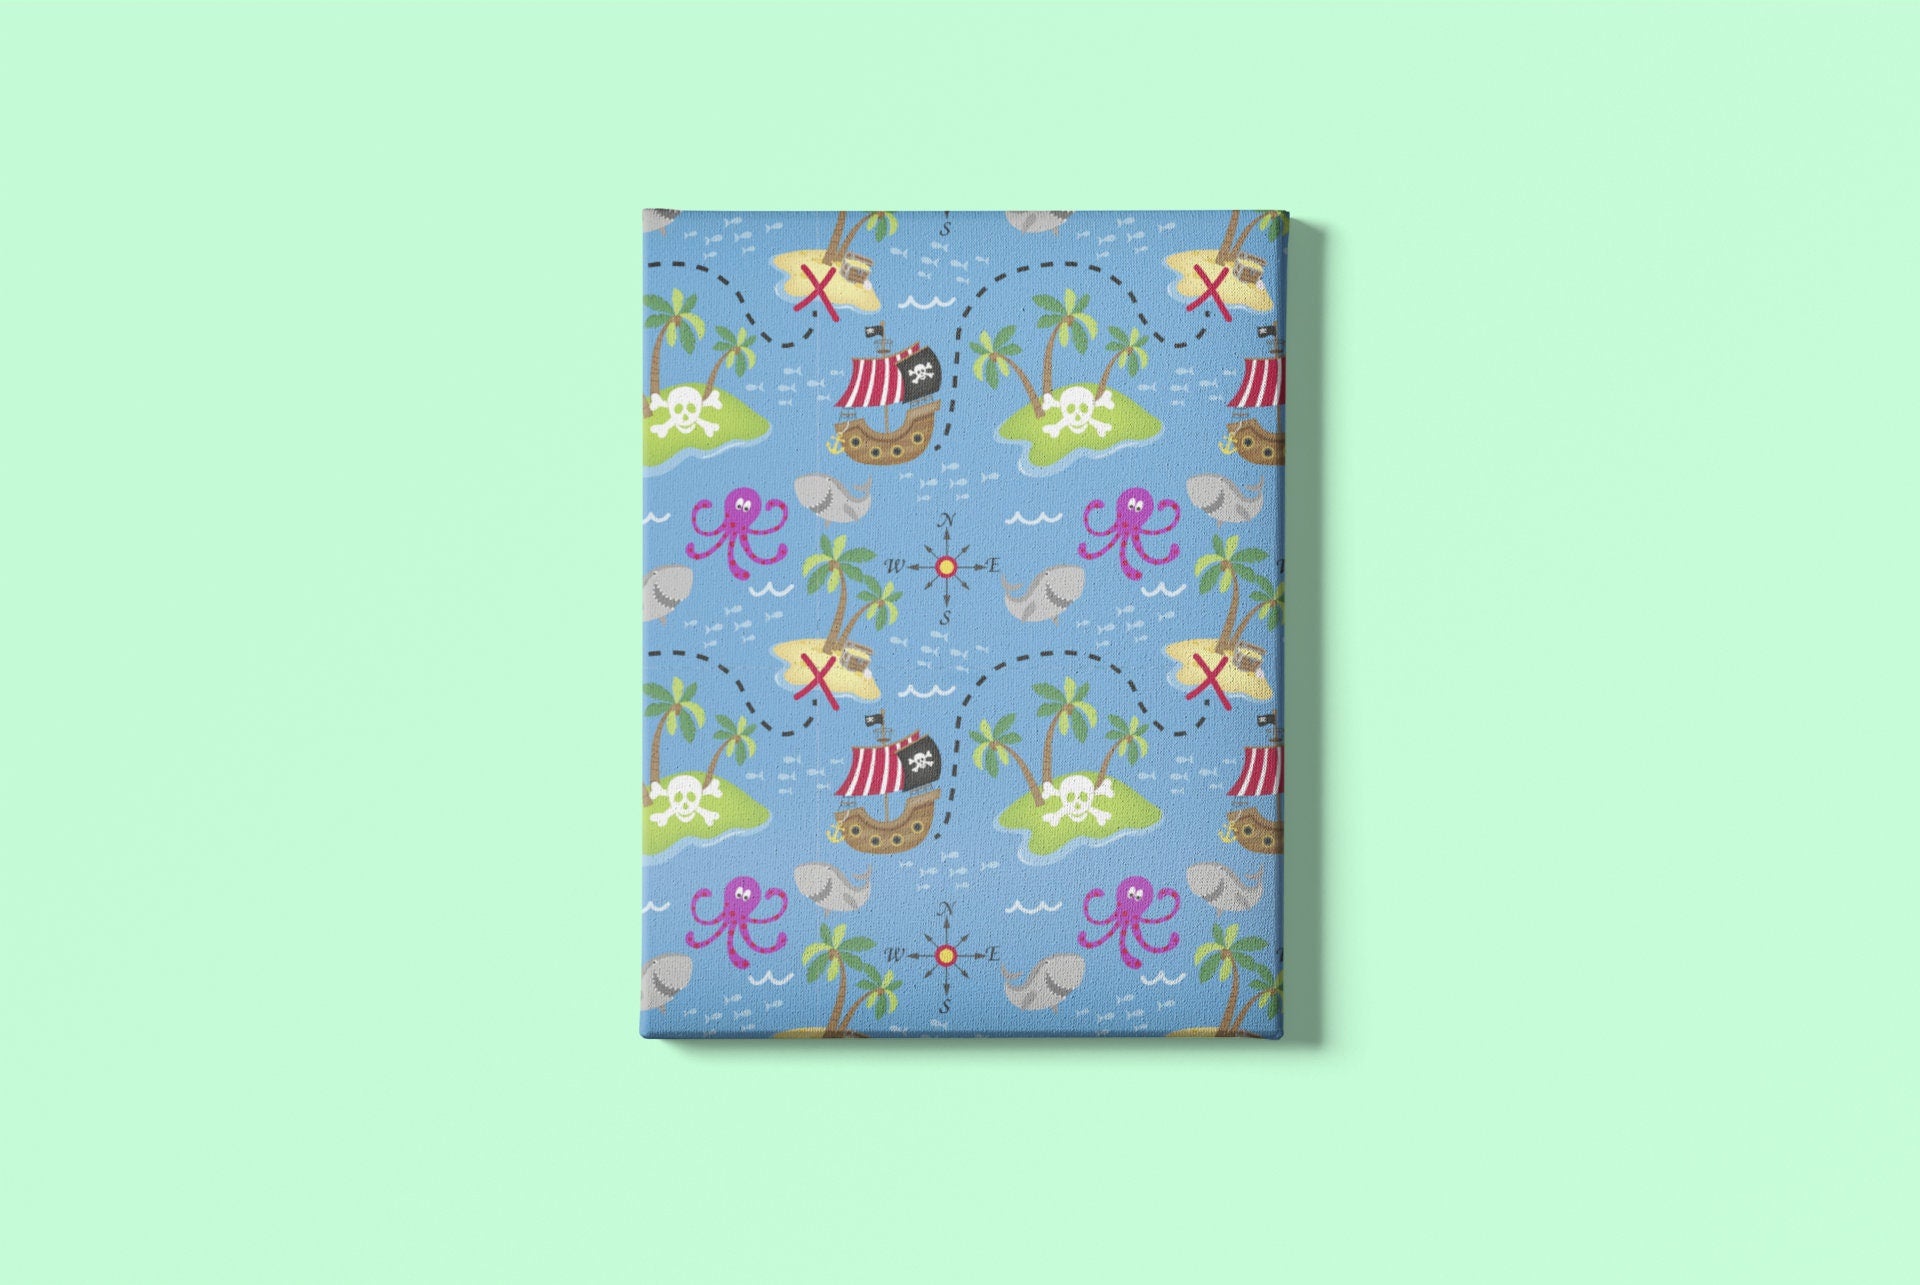 Pirate Island Wrapping Paper Alexander's 